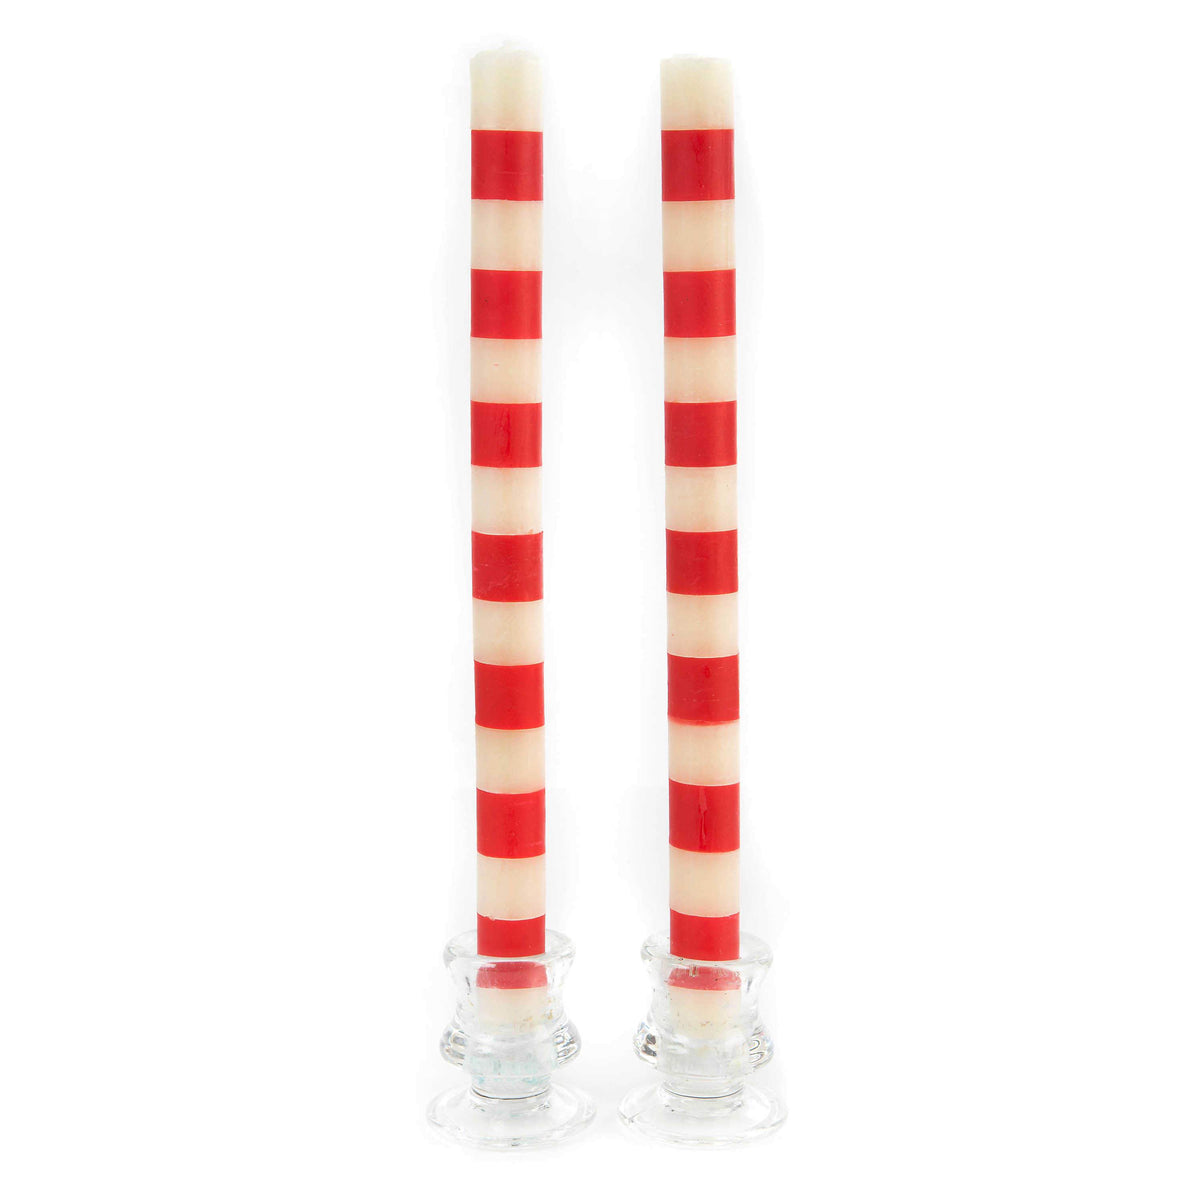 Red and White Candles - Set of 2 - My Christmas